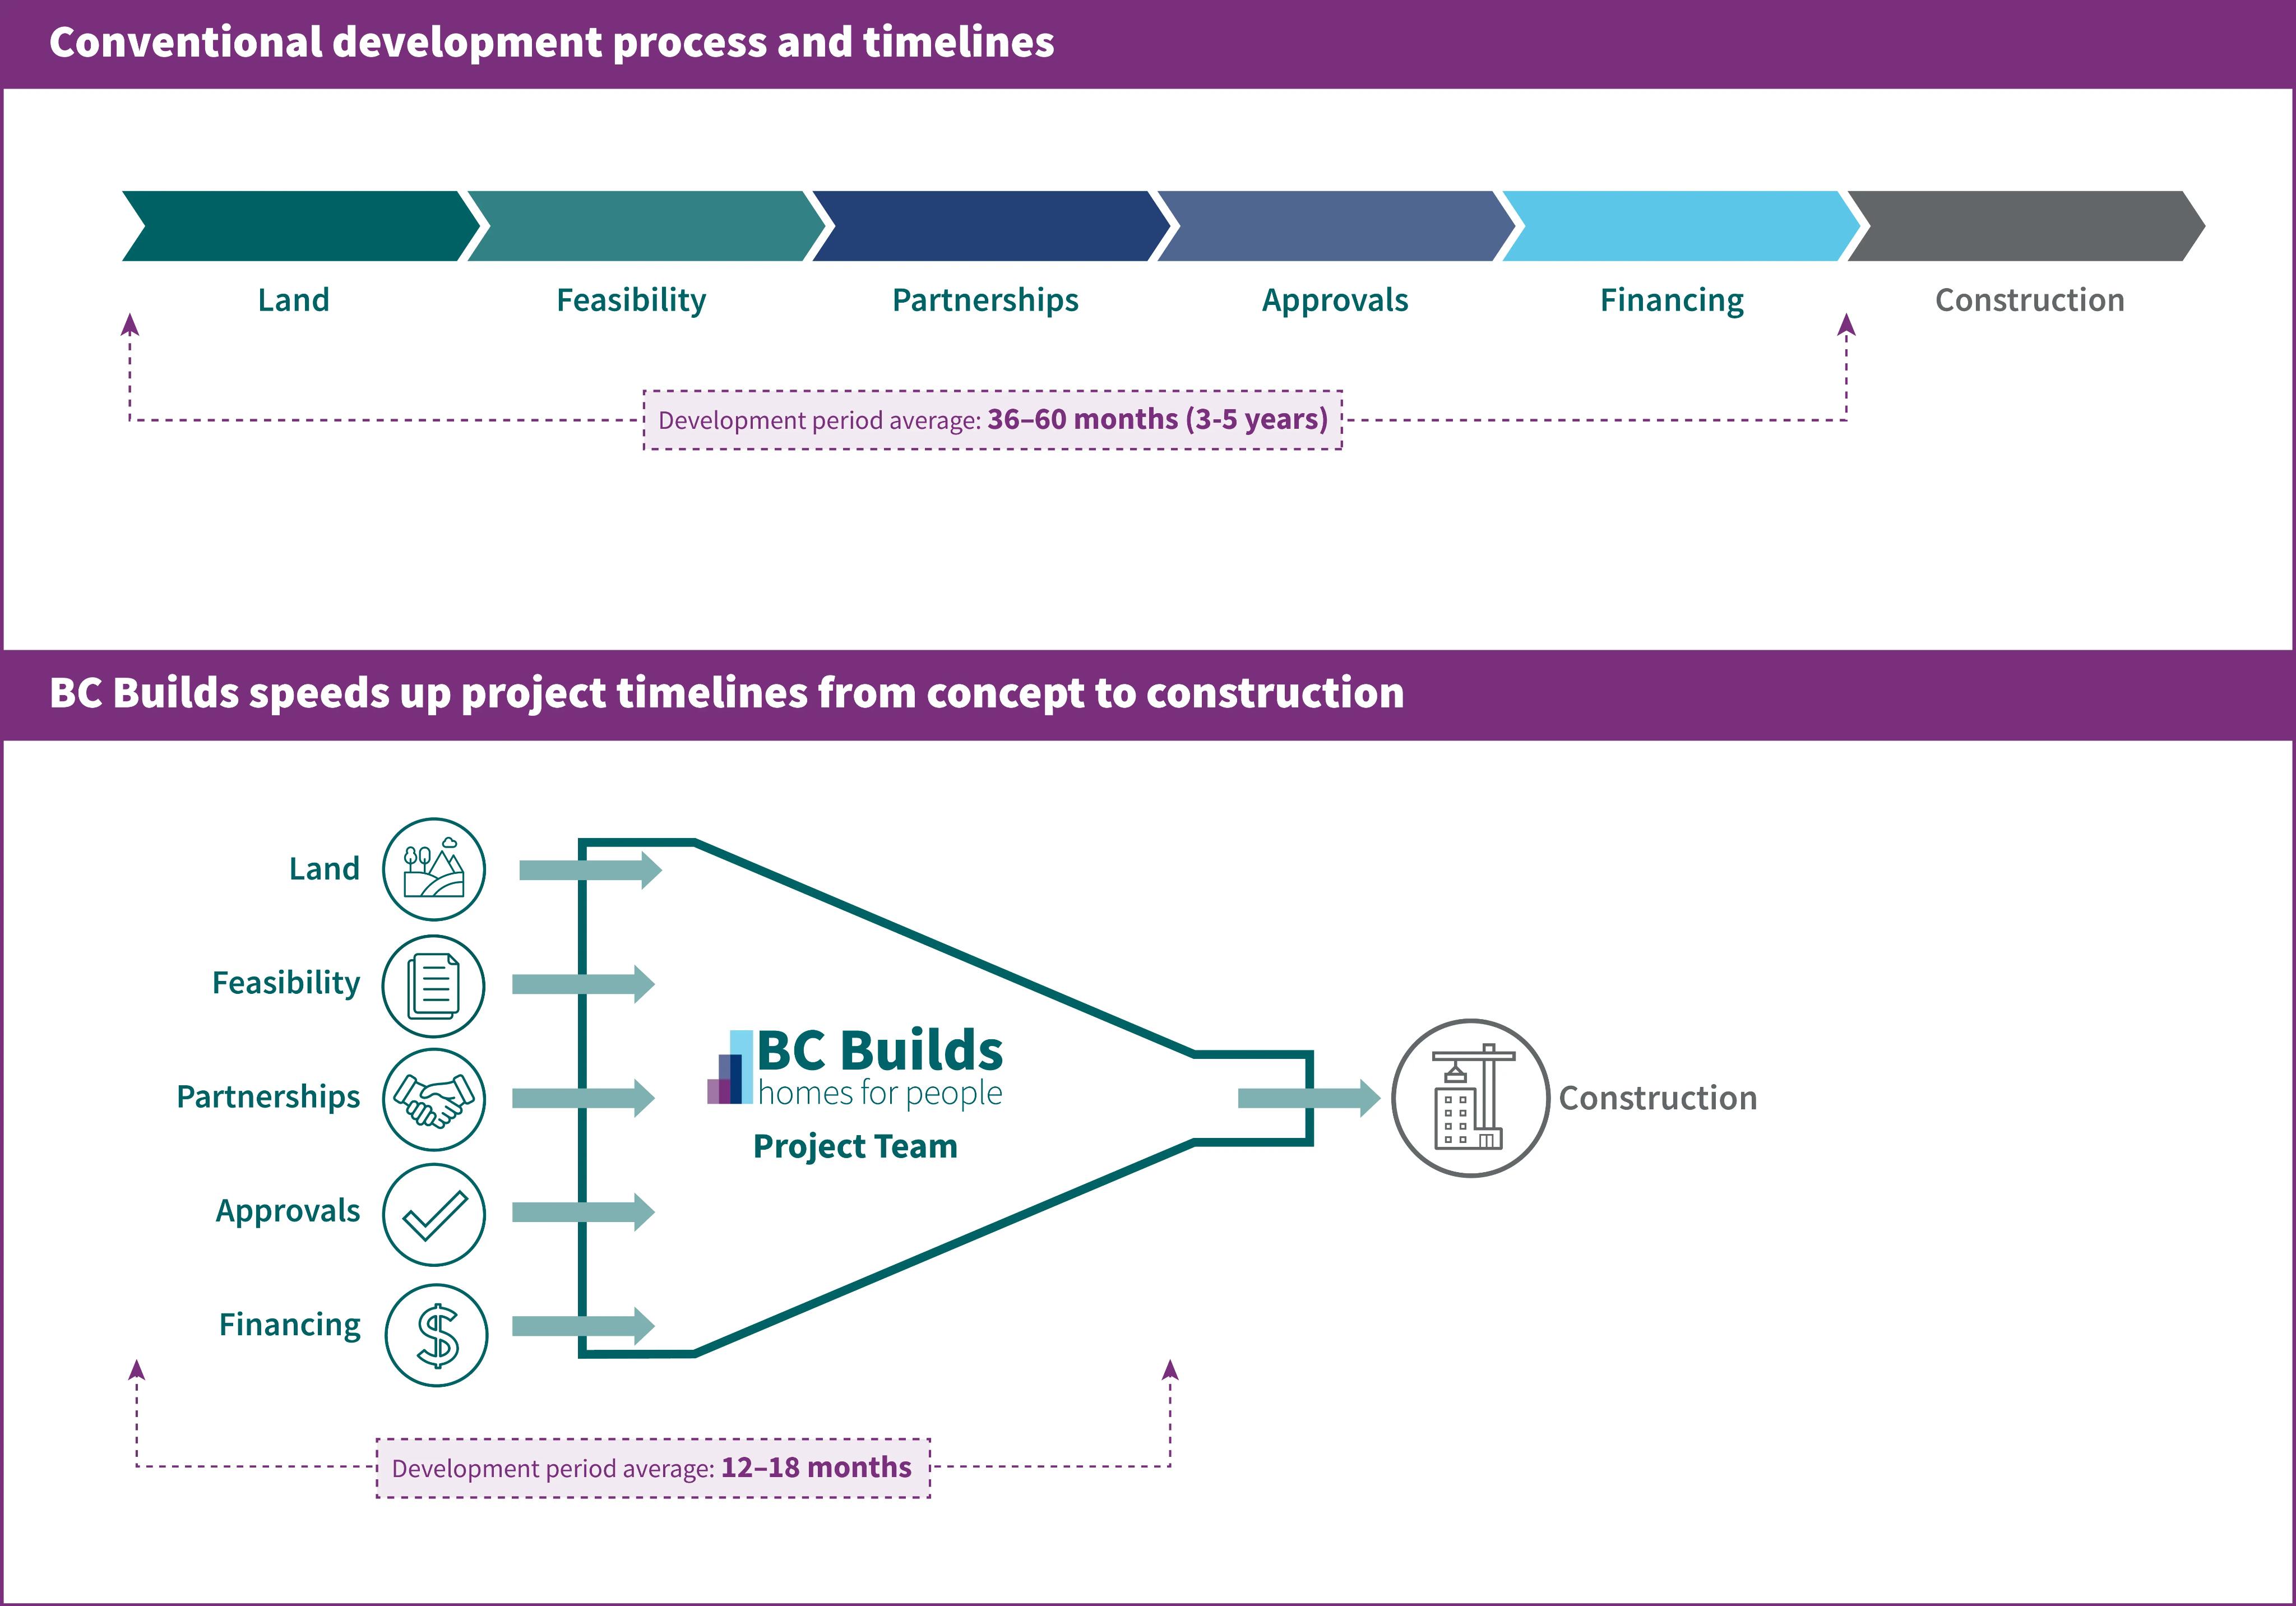 This image presents a comparison between a conventional development process and timelines versus an accelerated process by BC Builds. The top half of the image shows the conventional process as a linear timeline with stages labeled 'Land', 'Feasibility', 'Partnerships', 'Approvals', 'Financing', and 'Construction', suggesting a development period average of 36-60 months. The bottom half shows the BC Builds process, which includes the same stages but illustrates them as interconnected steps